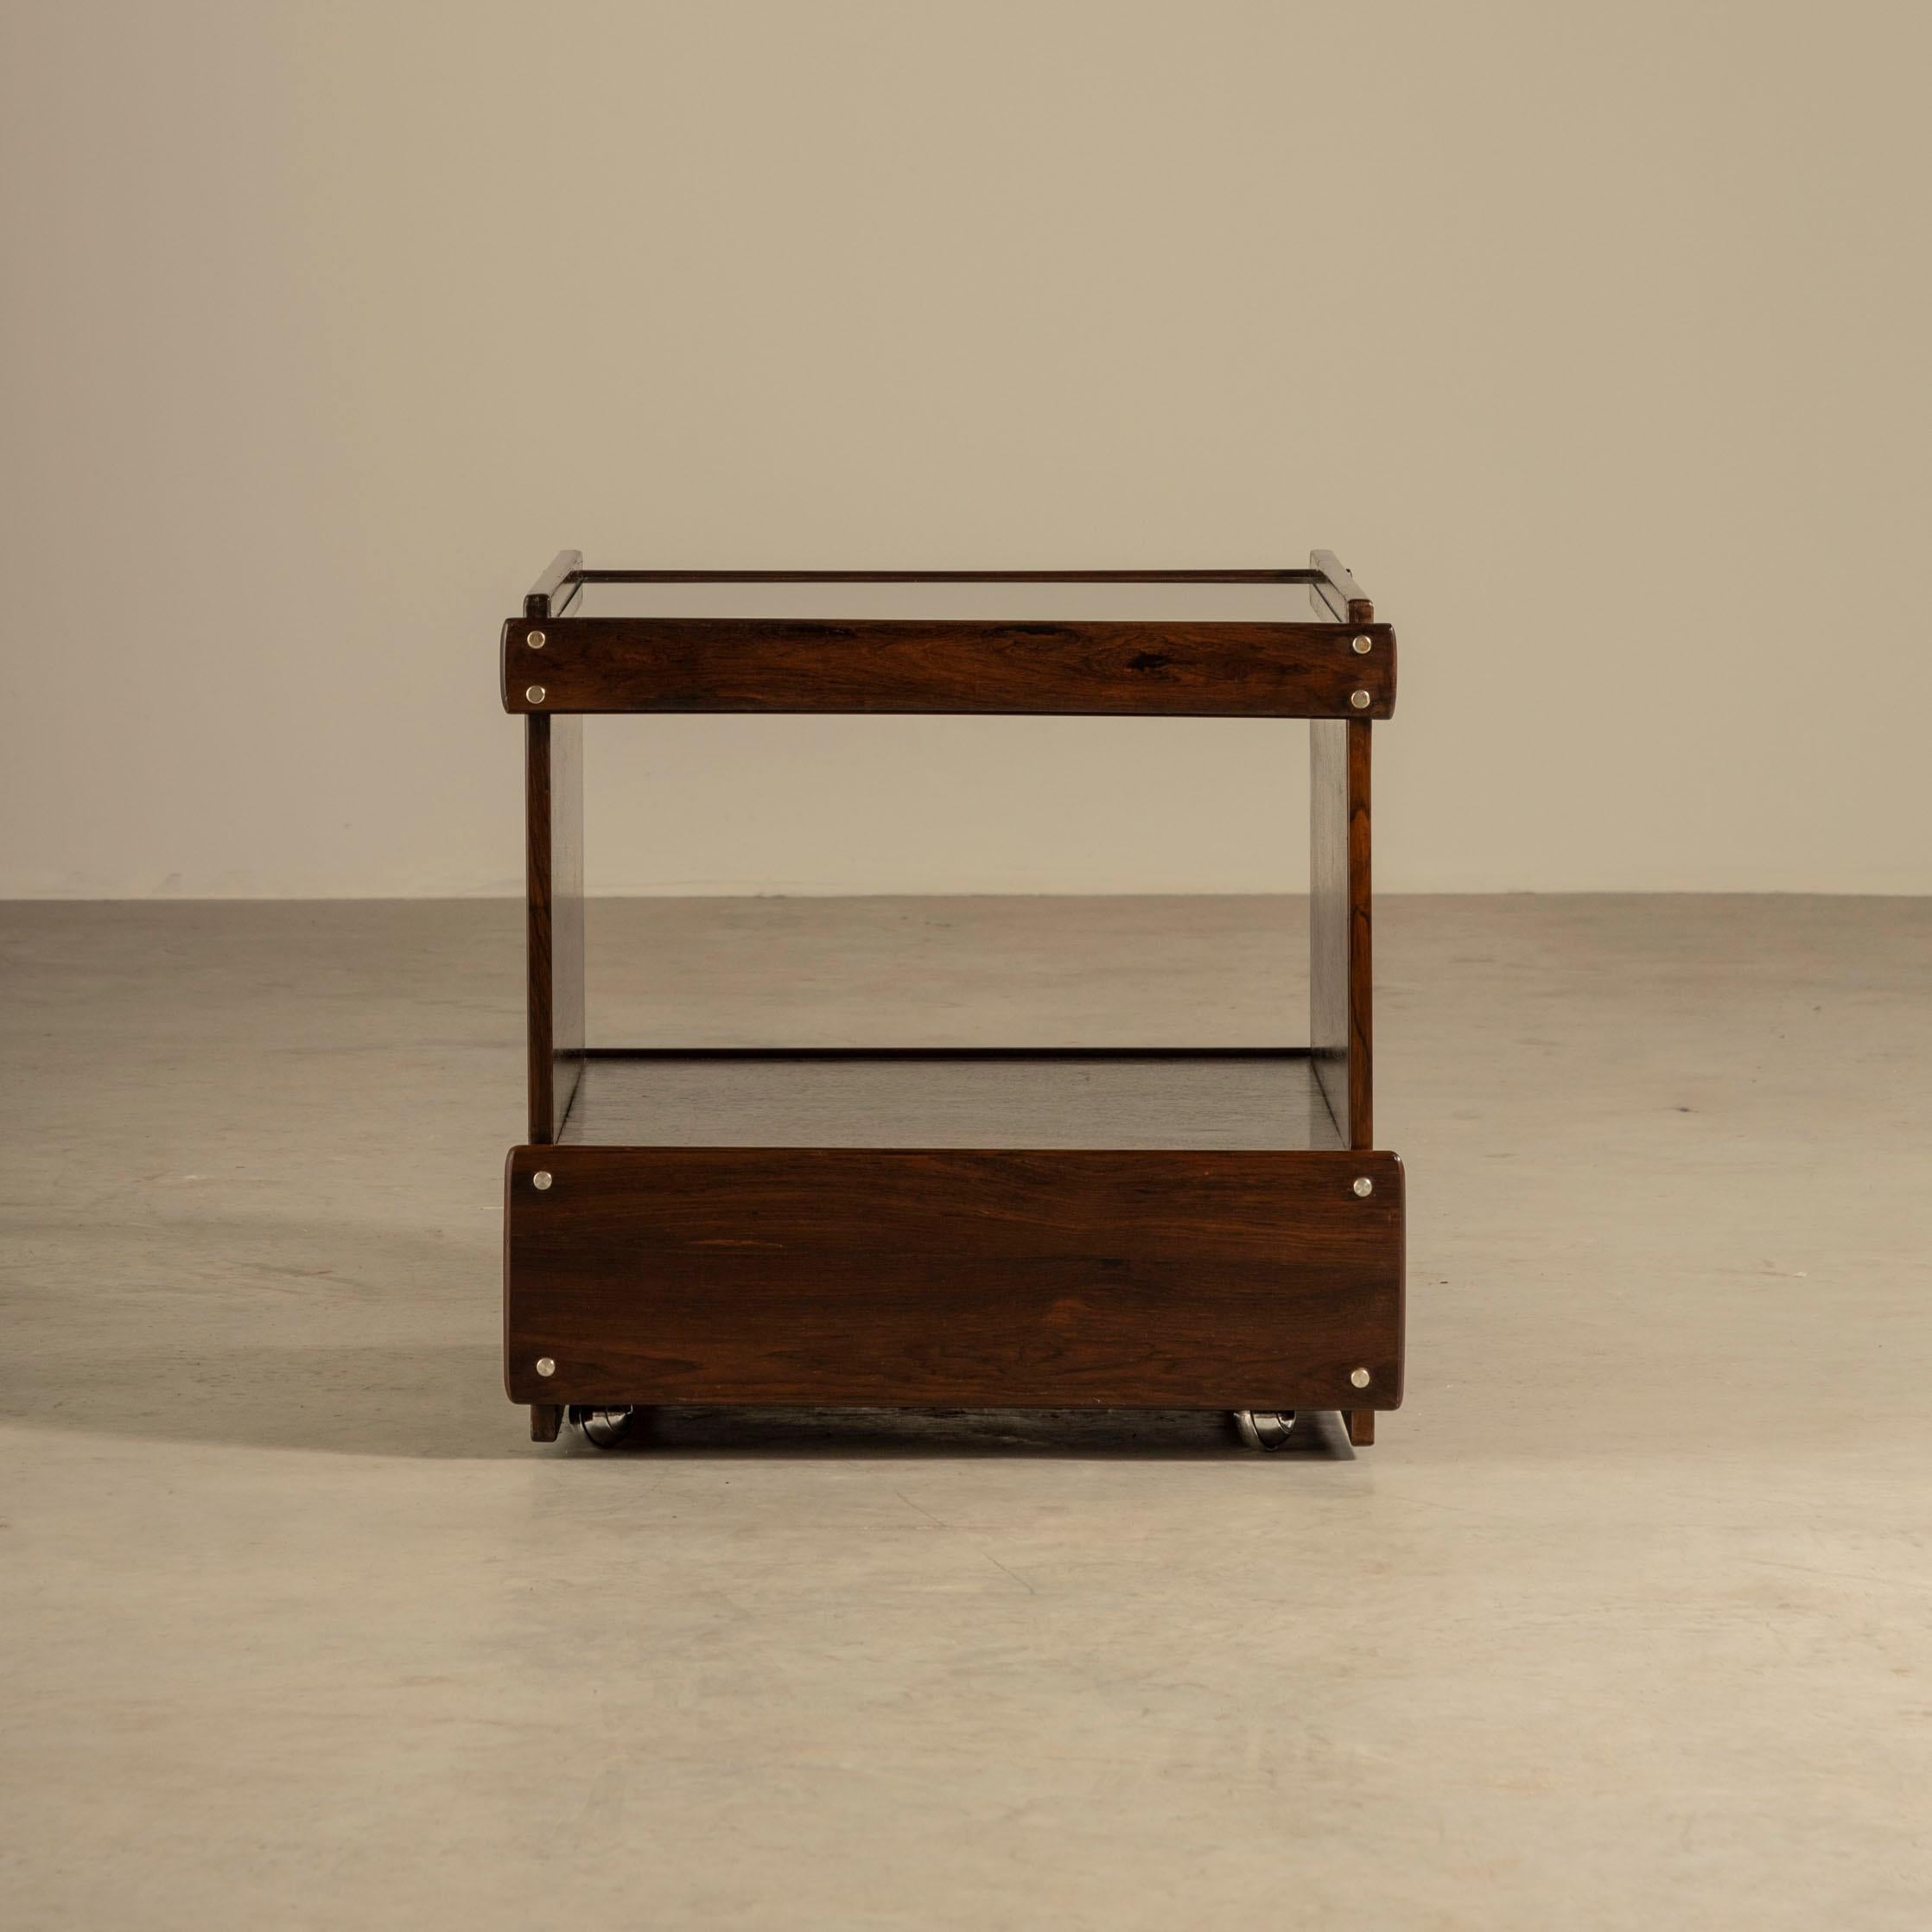 This Brazilian hardwood cart/trolley designed by the renowned architect and designer Sérgio Rodrigues in the 1960s is truly exceptional. The clean and modern look of the glass top is beautifully juxtaposed with the minimalist design and the natural